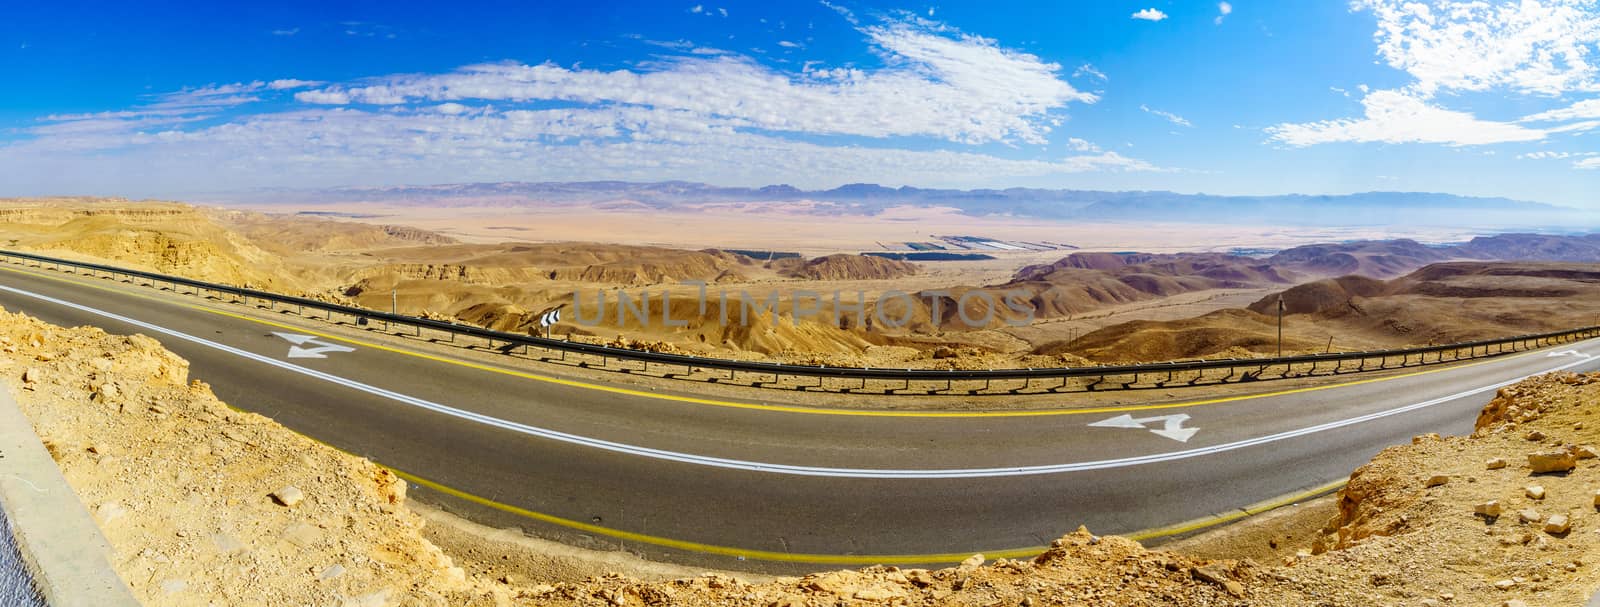 Arava desert from mount Ayit lookout by RnDmS